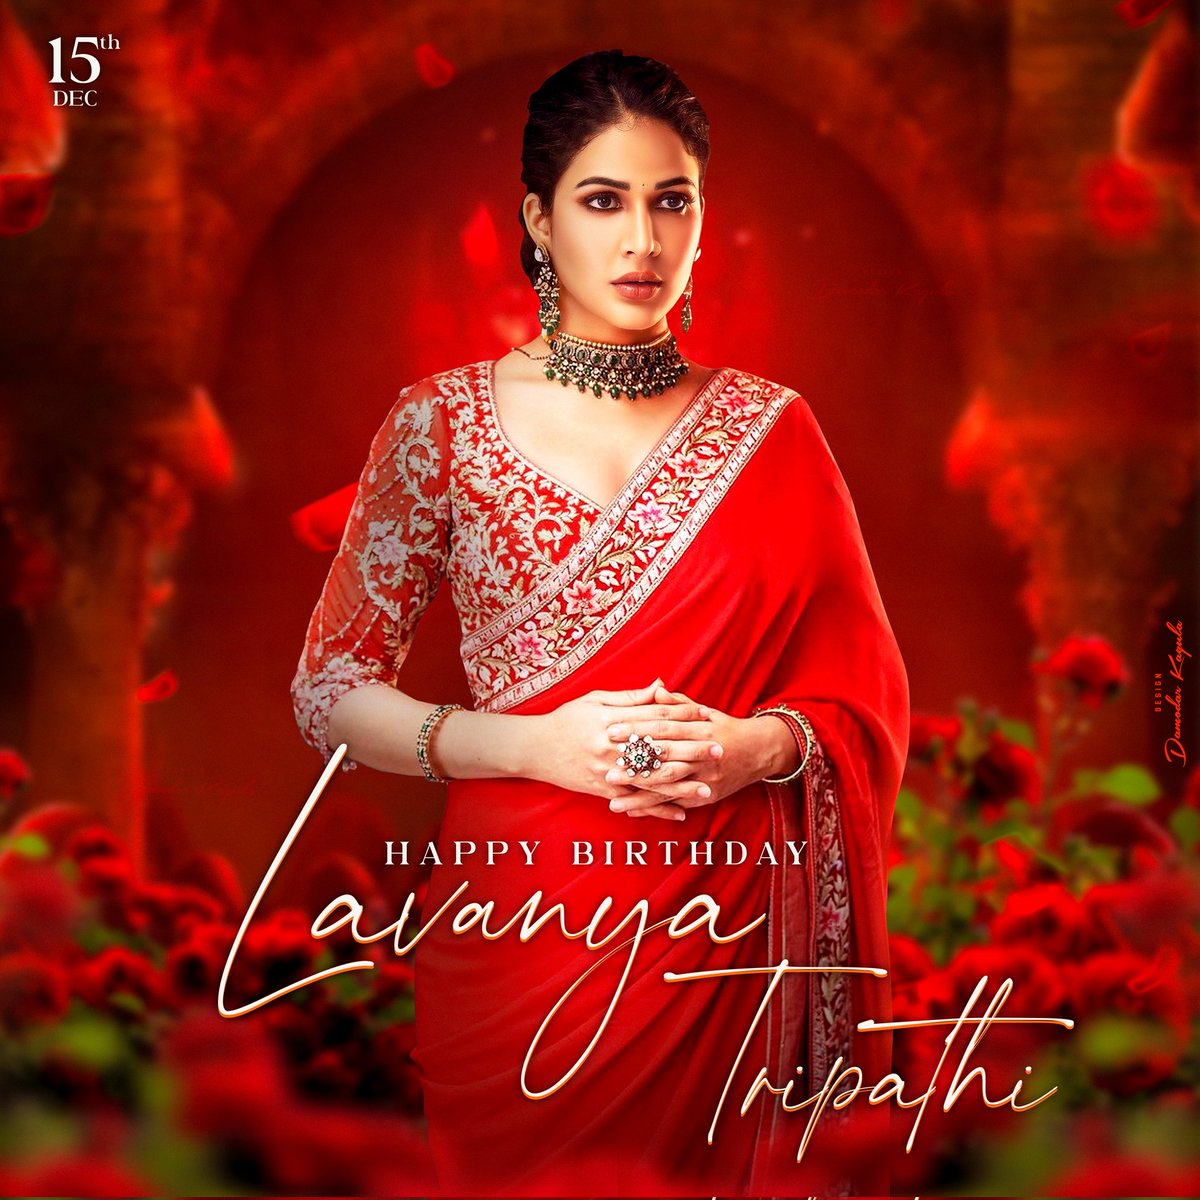 Wishing a Happiest Birthday to the gorgeous & talented actress @Itslavanya a Happiest Birthday 💐 Wish you lots of happiness in your married life and lots of success ahead 😇 design : @damodar_kagula #HBDLavanyaTripathi #HappyBirthdayLavanyaTripathi #LavanyaTripathi